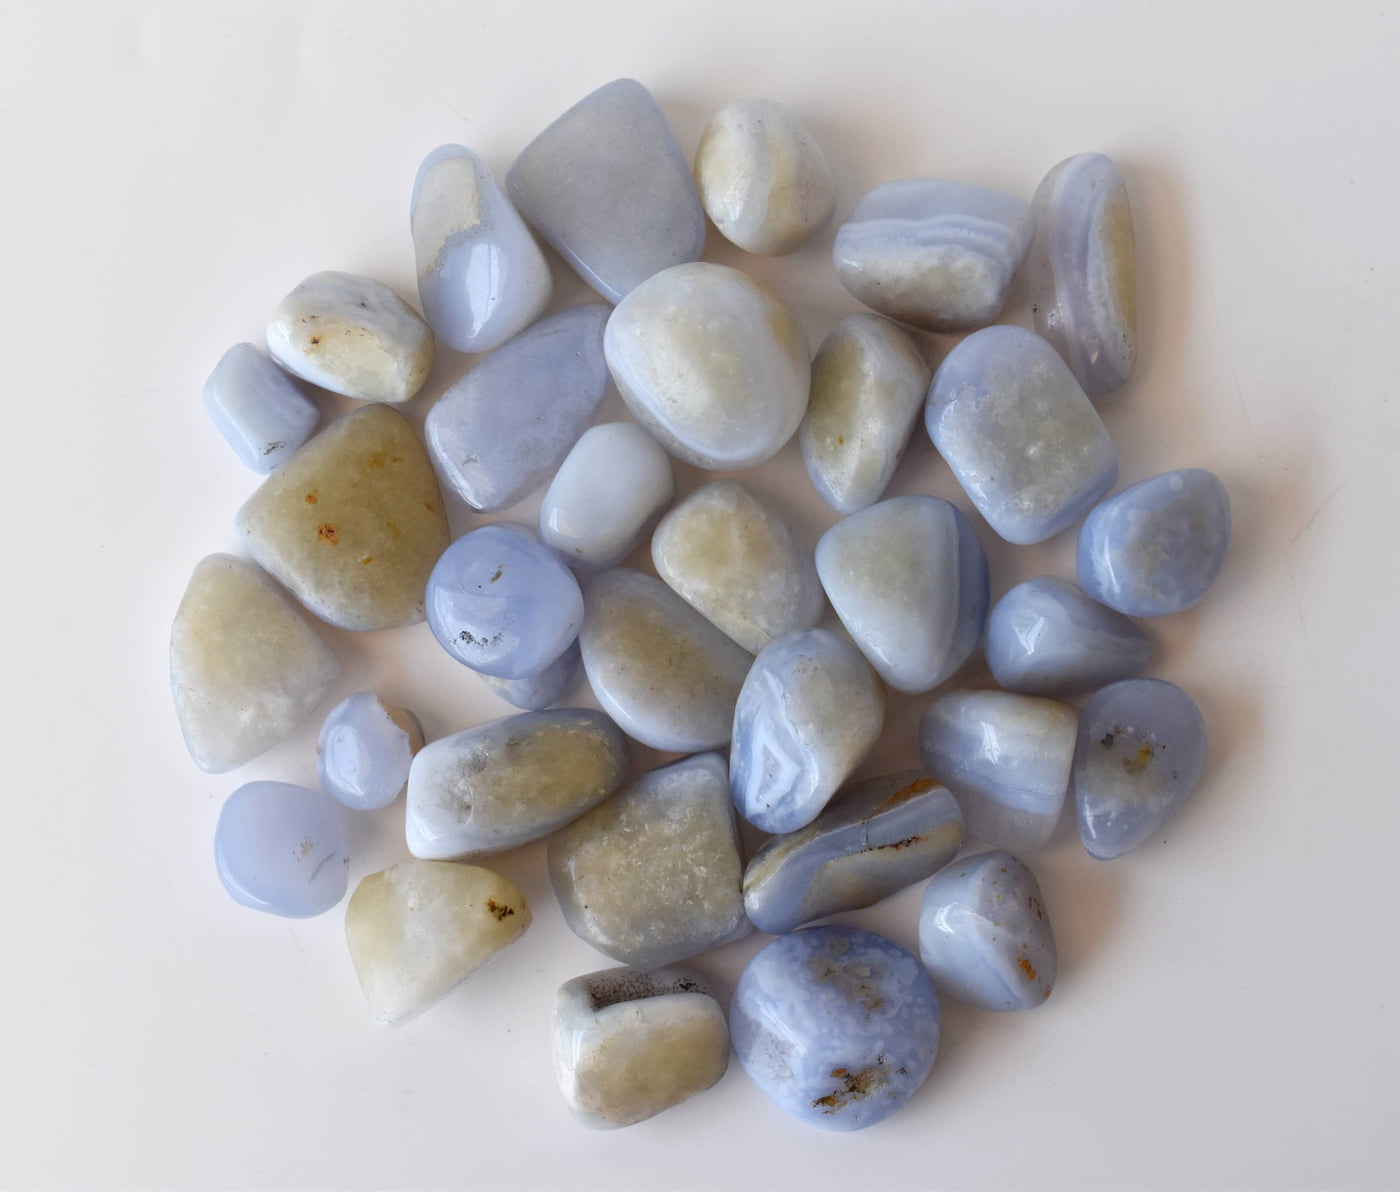 Blue Lace Agate Tumbled Crystals (Trust and Self Discovery)